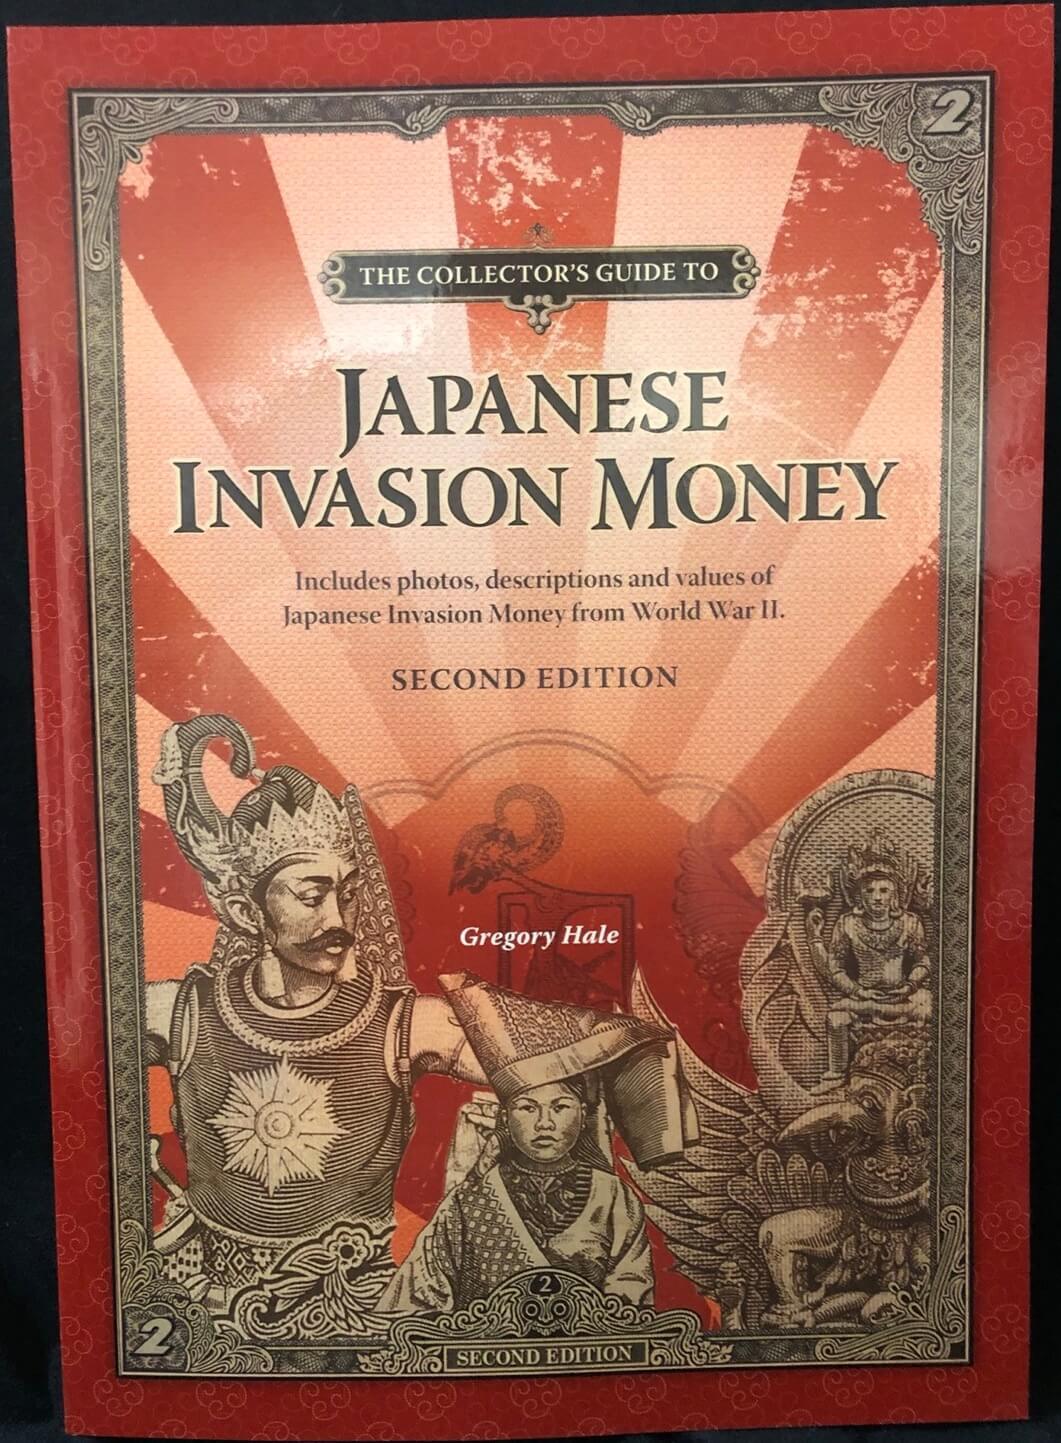 The Collector's Guide to Japanese Invasion Money Book - 2nd Edition product image